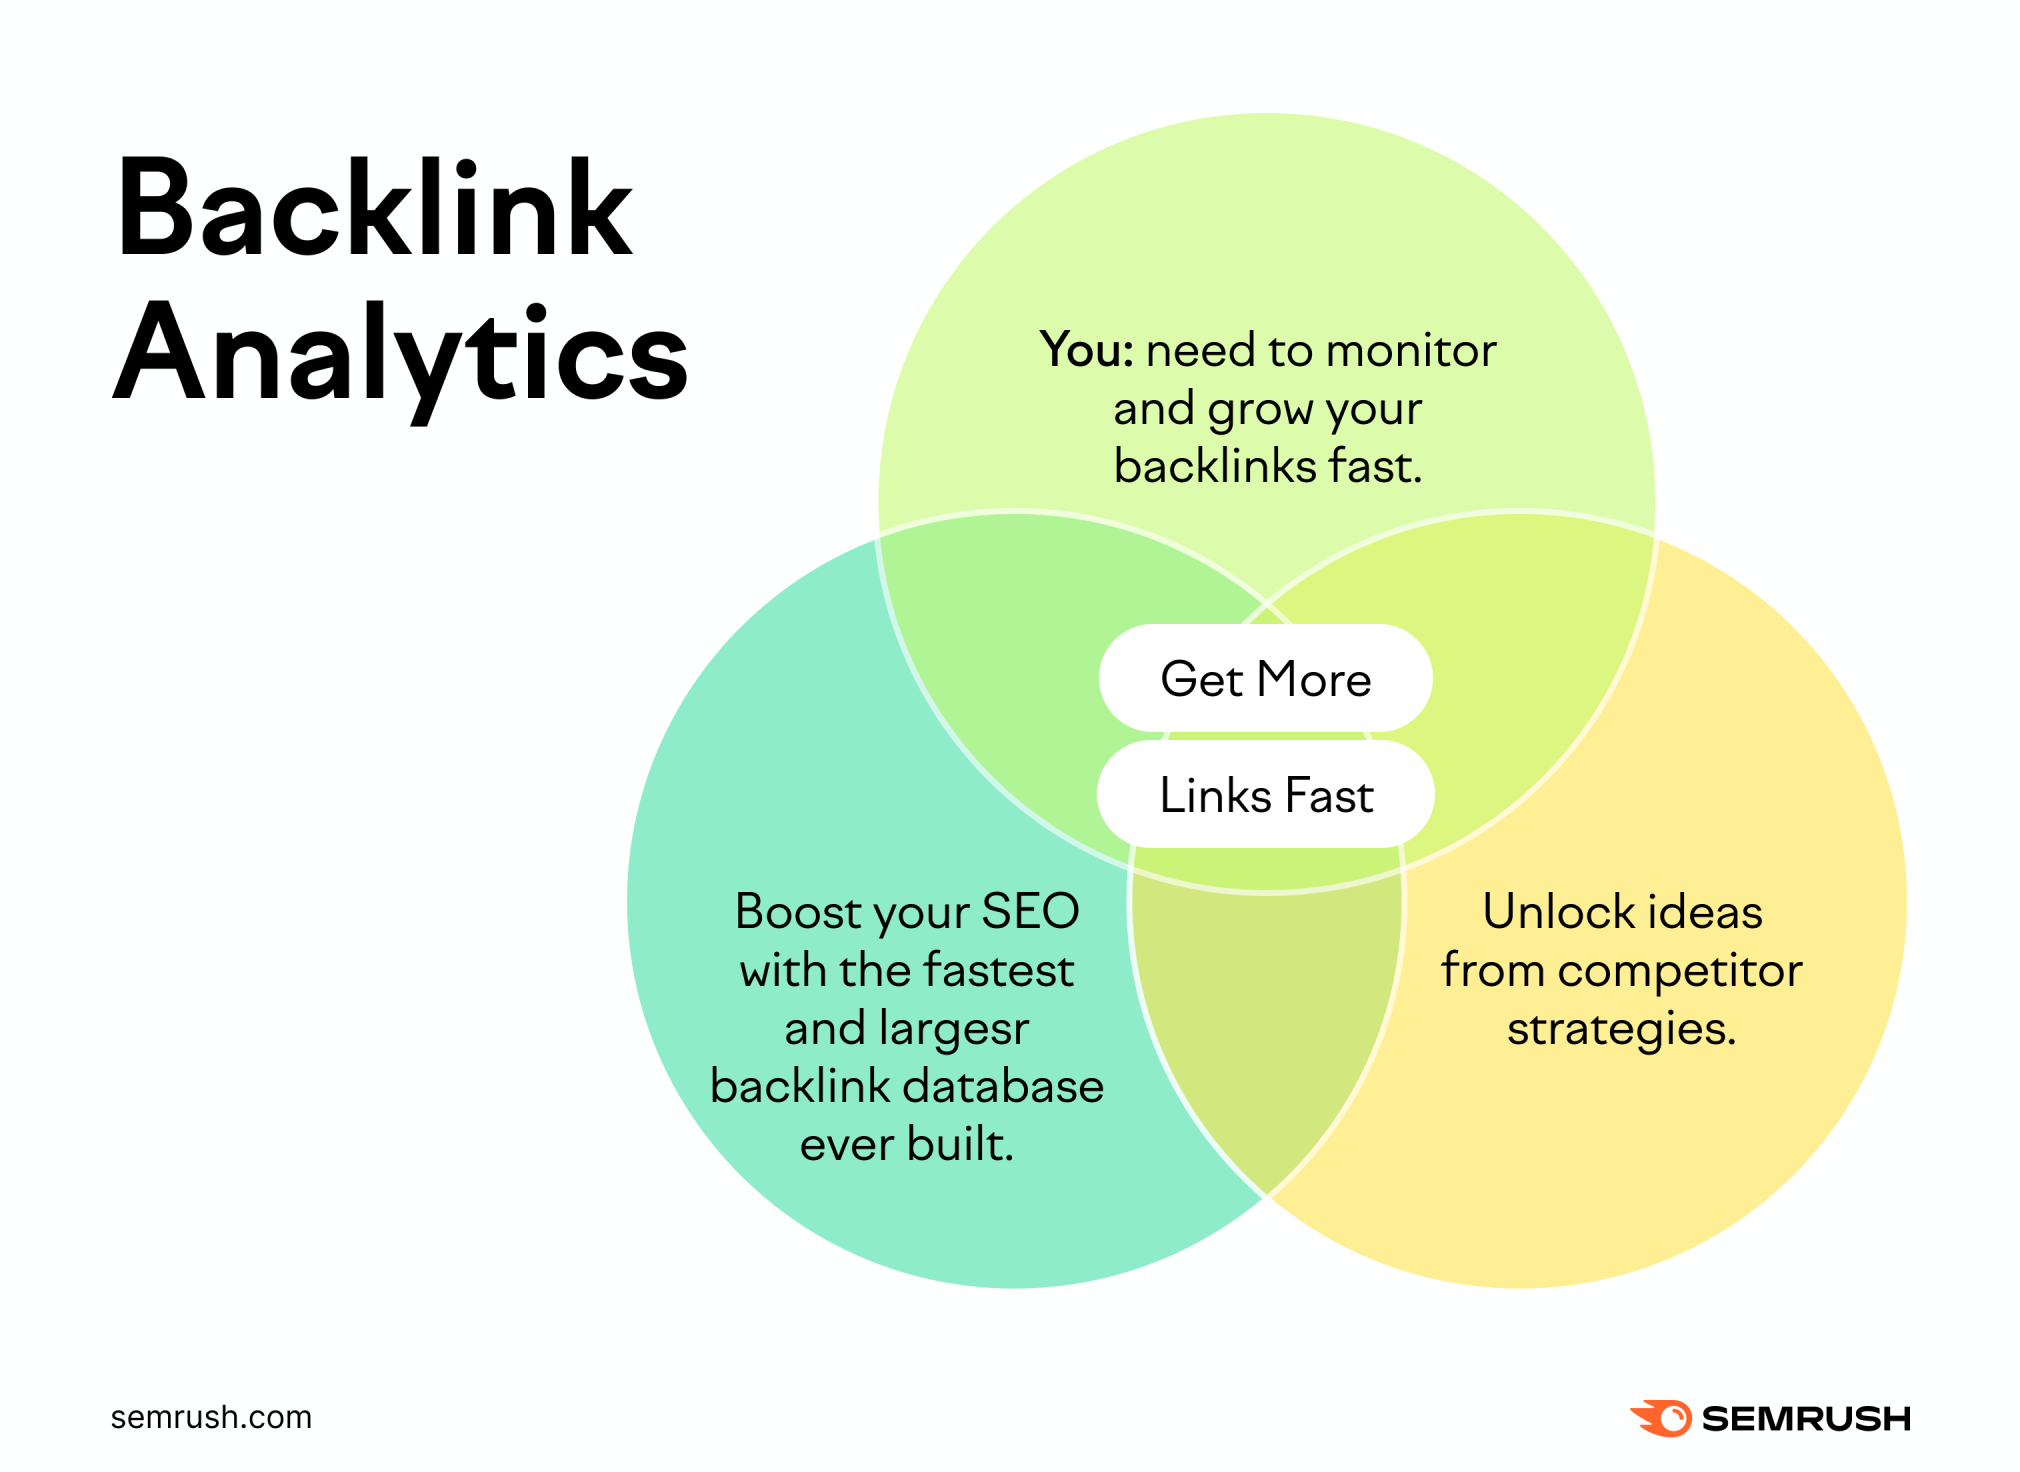 If you need to get more links fast, backlink analytics is for you!